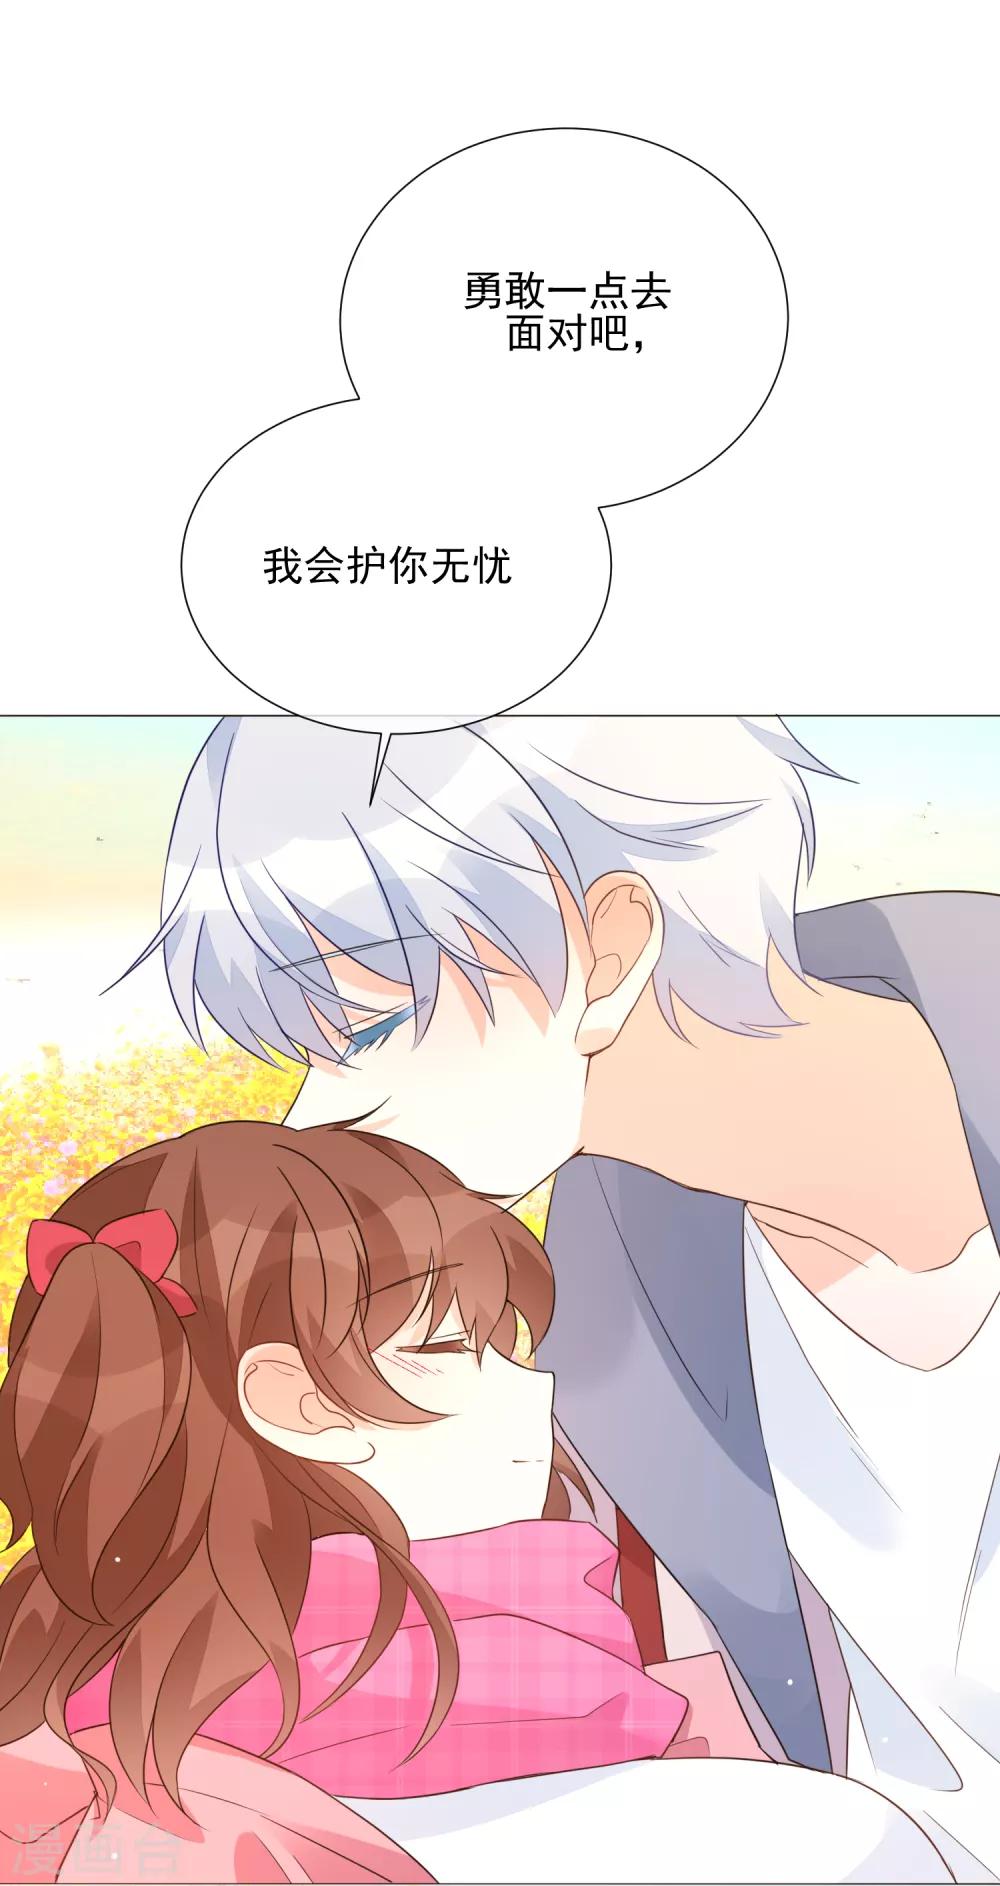 One Kiss A Day - 第87话 不好的预感 - 4